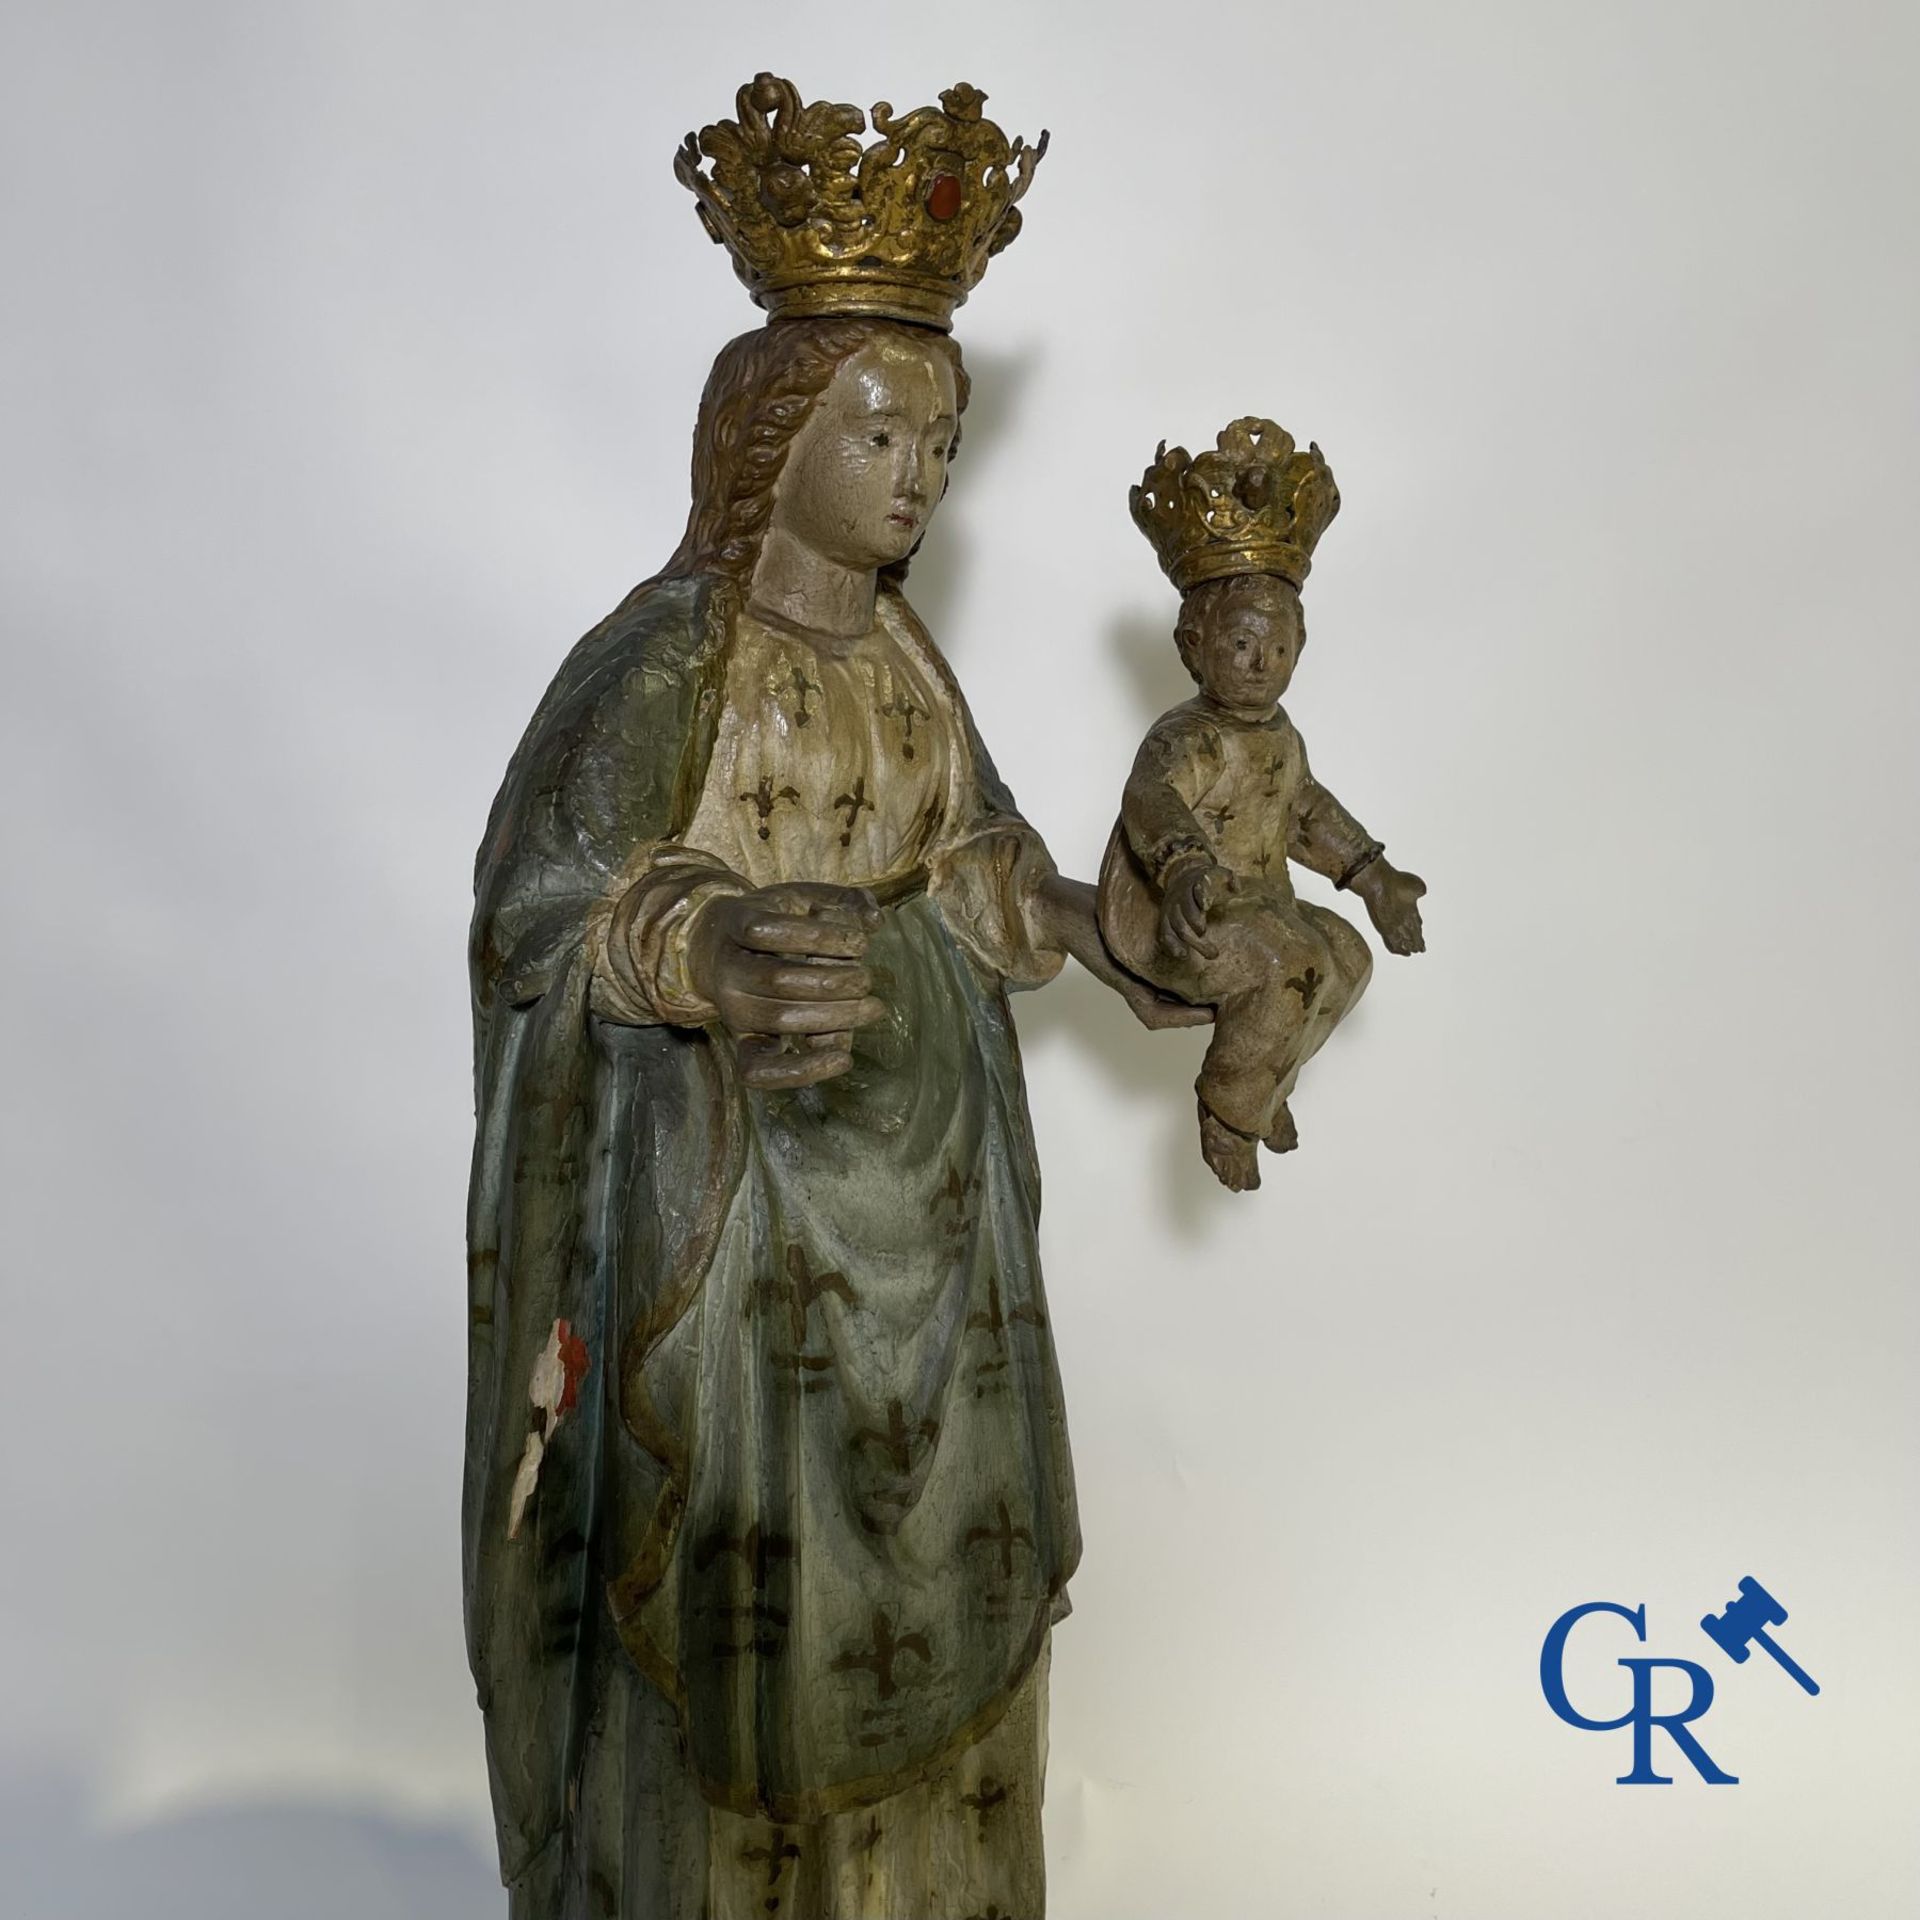 Wooden polychrome Baroque sculpture of Mary with child. The Crown inlaid with an amber-like rock. - Image 10 of 30